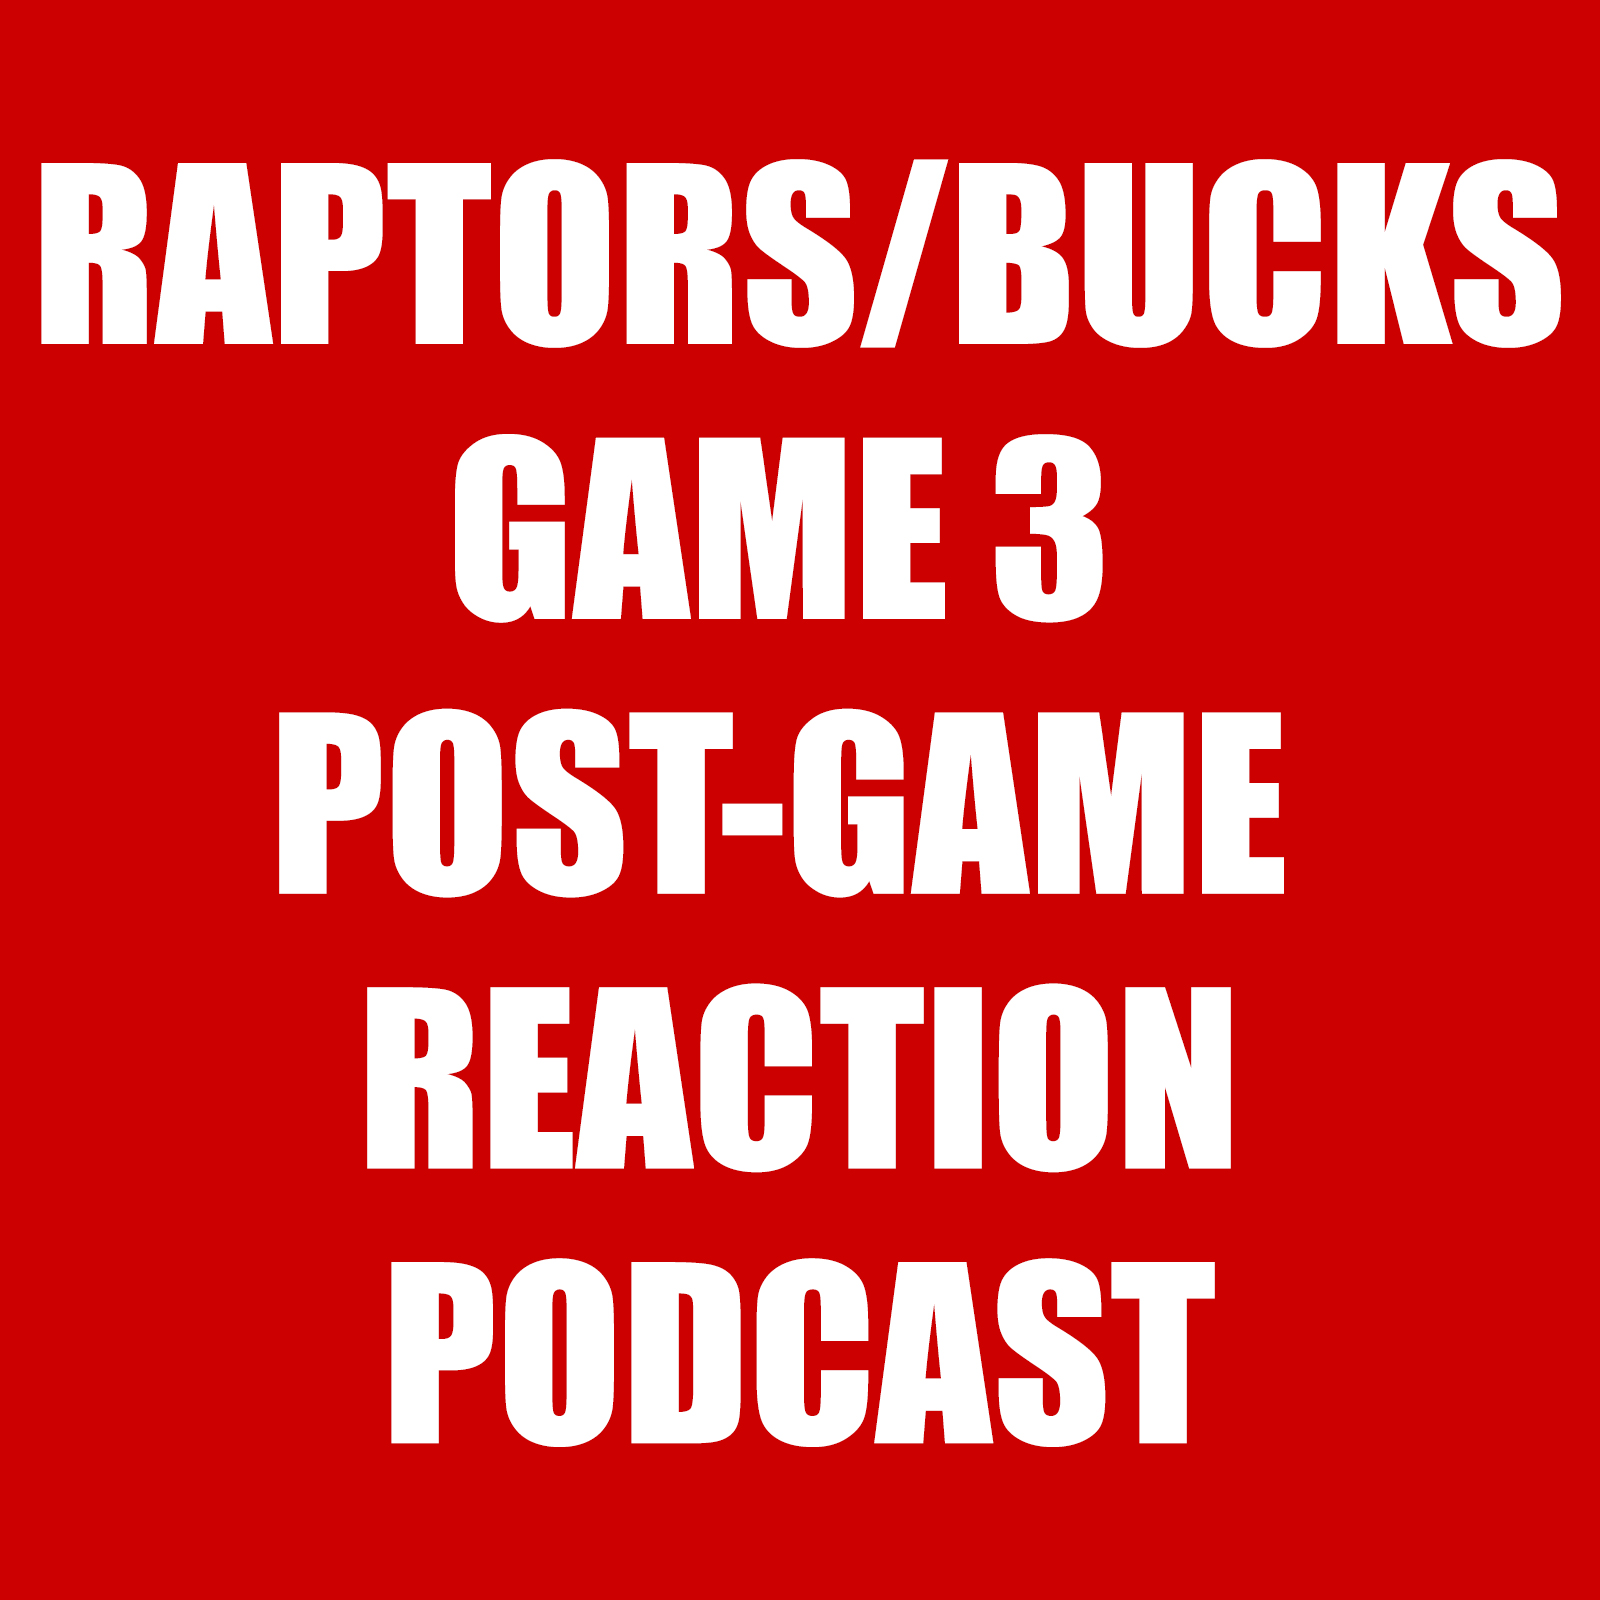 Raptors-Bucks Game 3 Reaction Podcast – WTF was that?